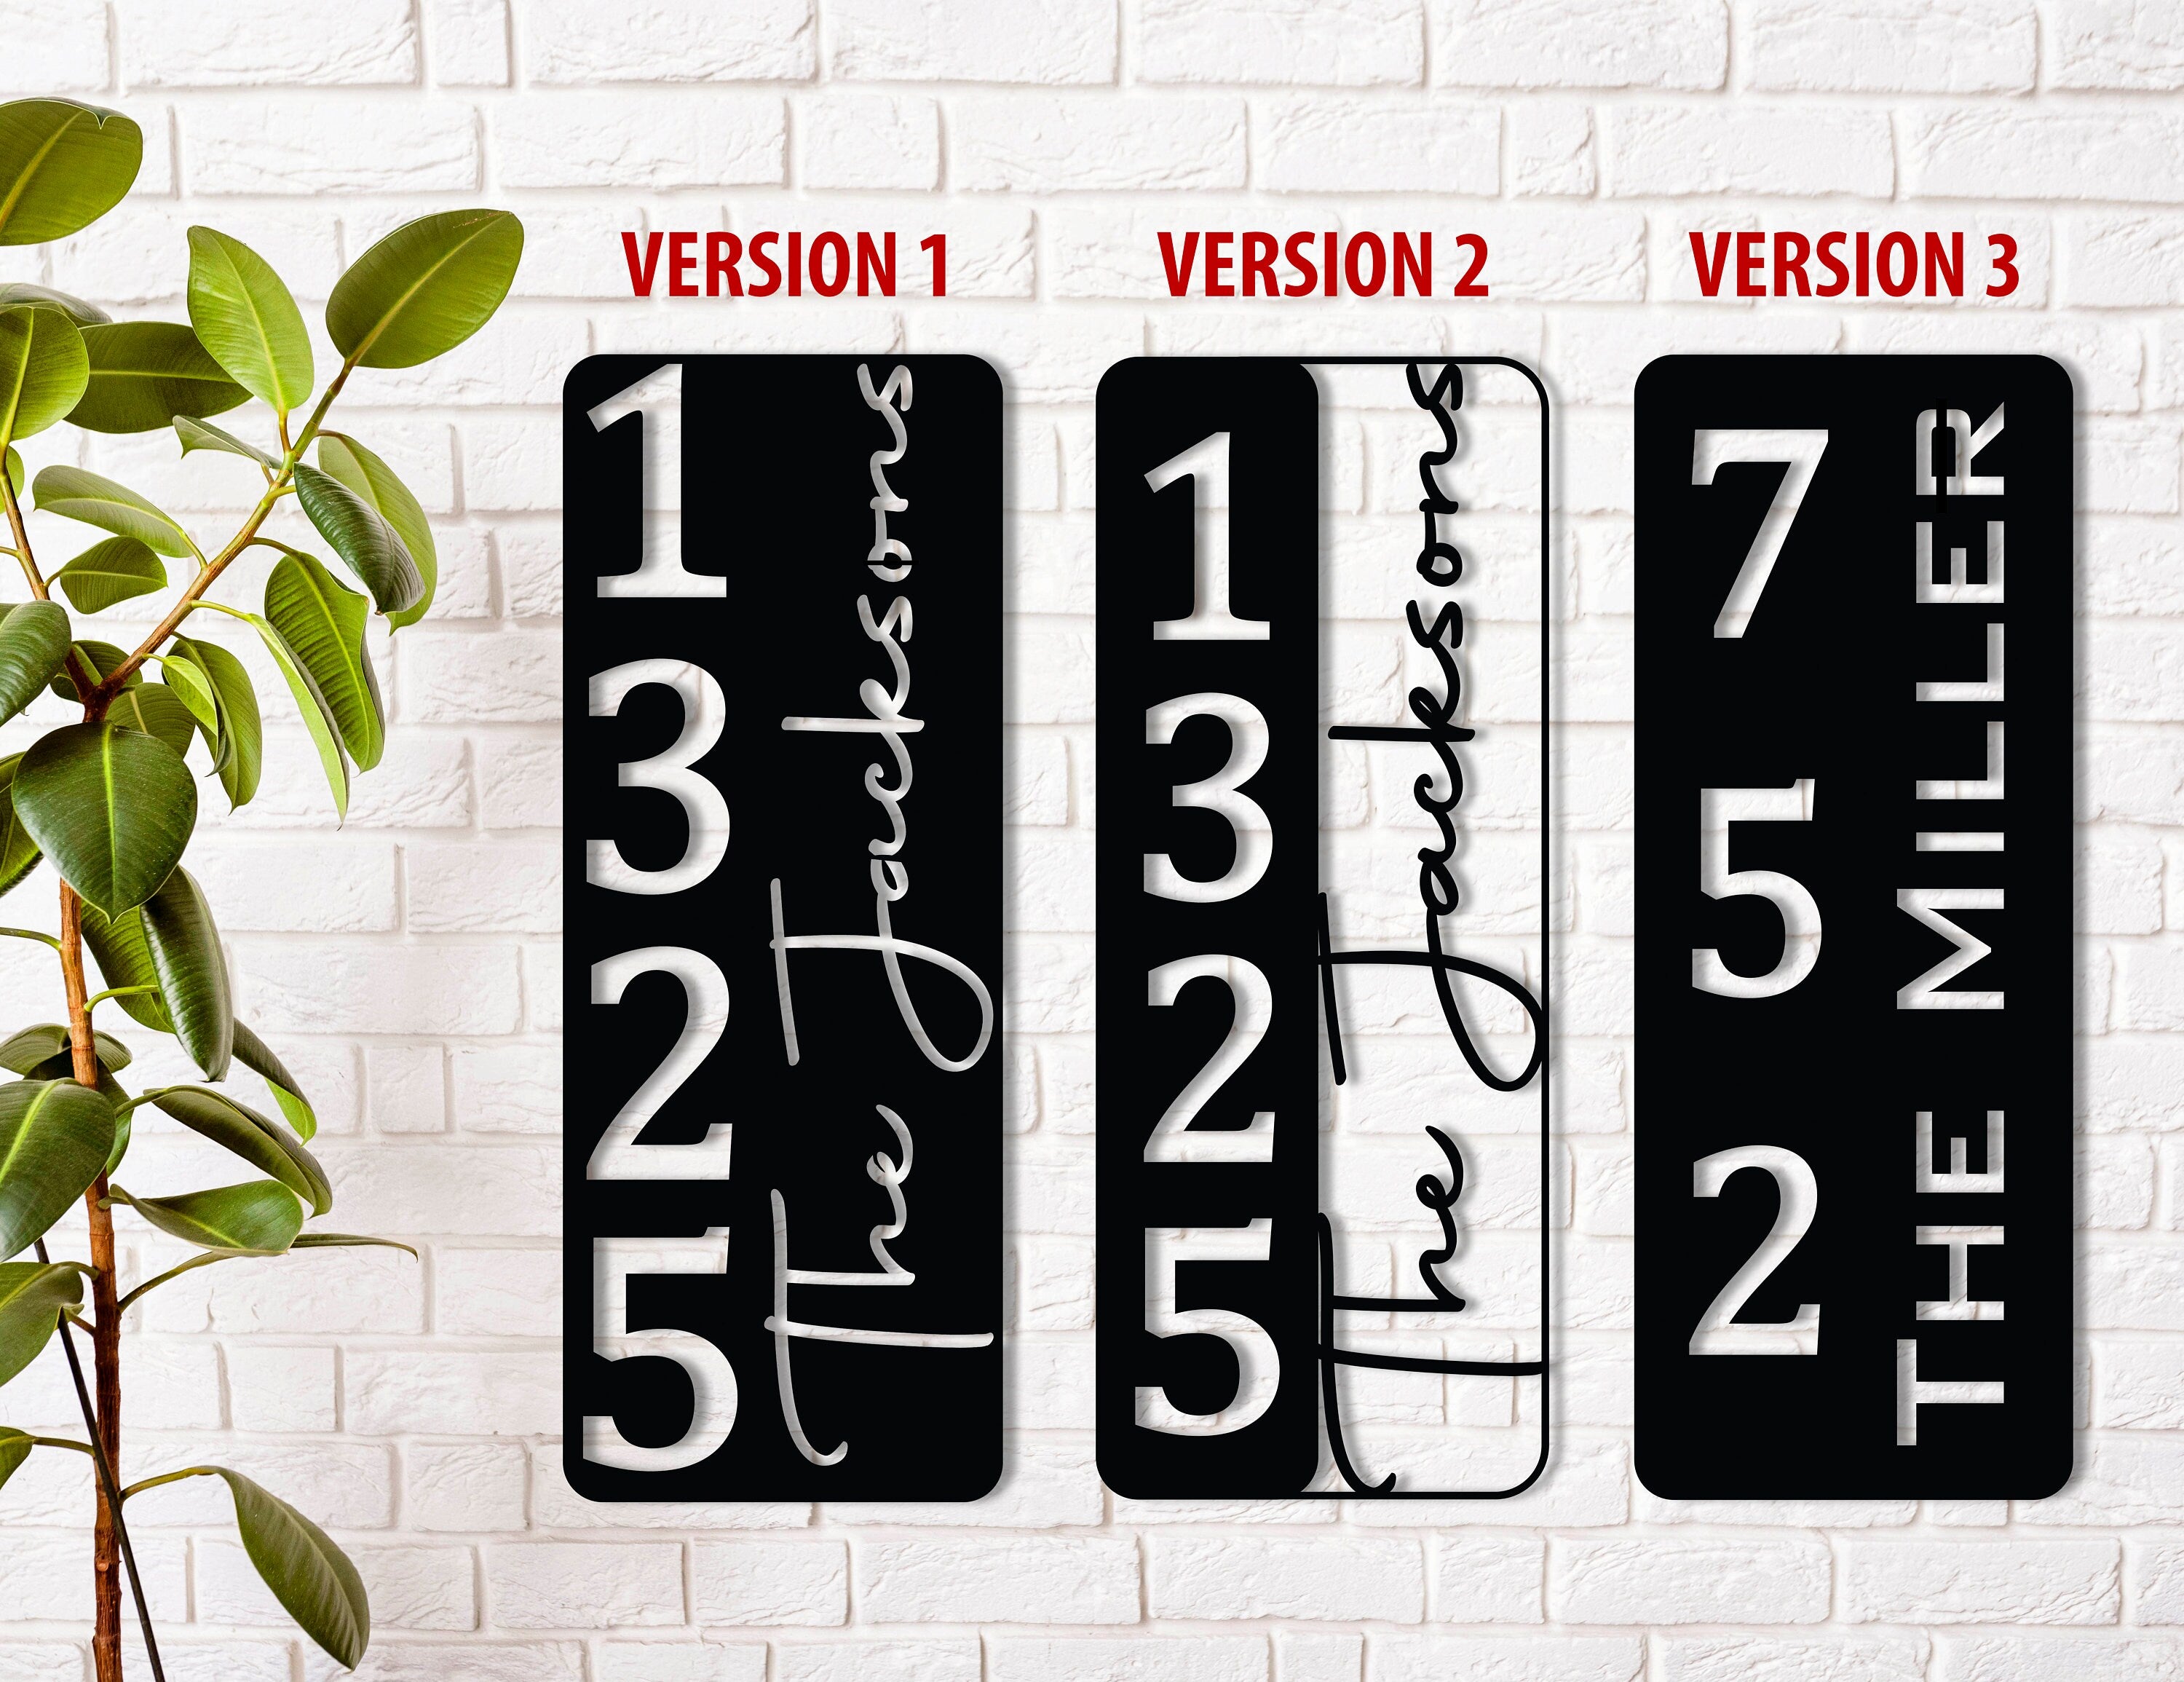 House Name Numbers Signs, Door Numbers Plaques, Custom Wall Decor, Metal Aesthetic Outdoor Home Decor, Metal Wall Decor